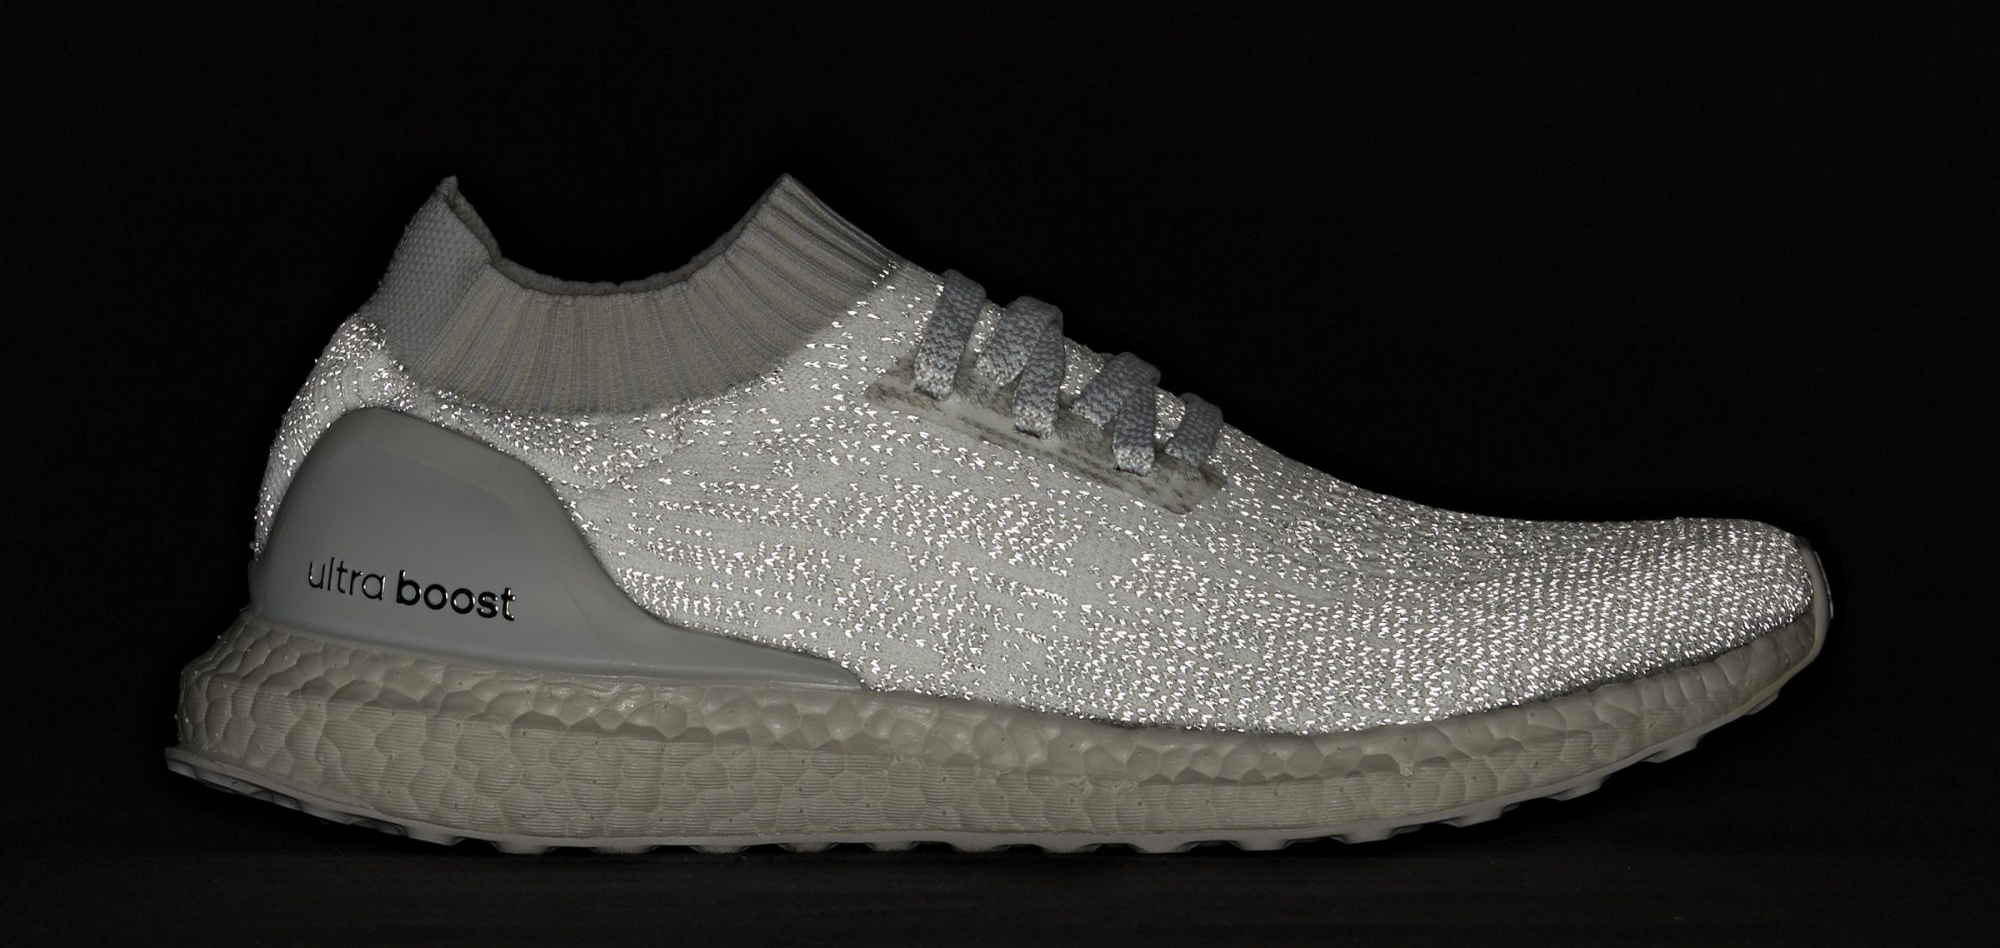 adidas ultra boost white uncaged reflective